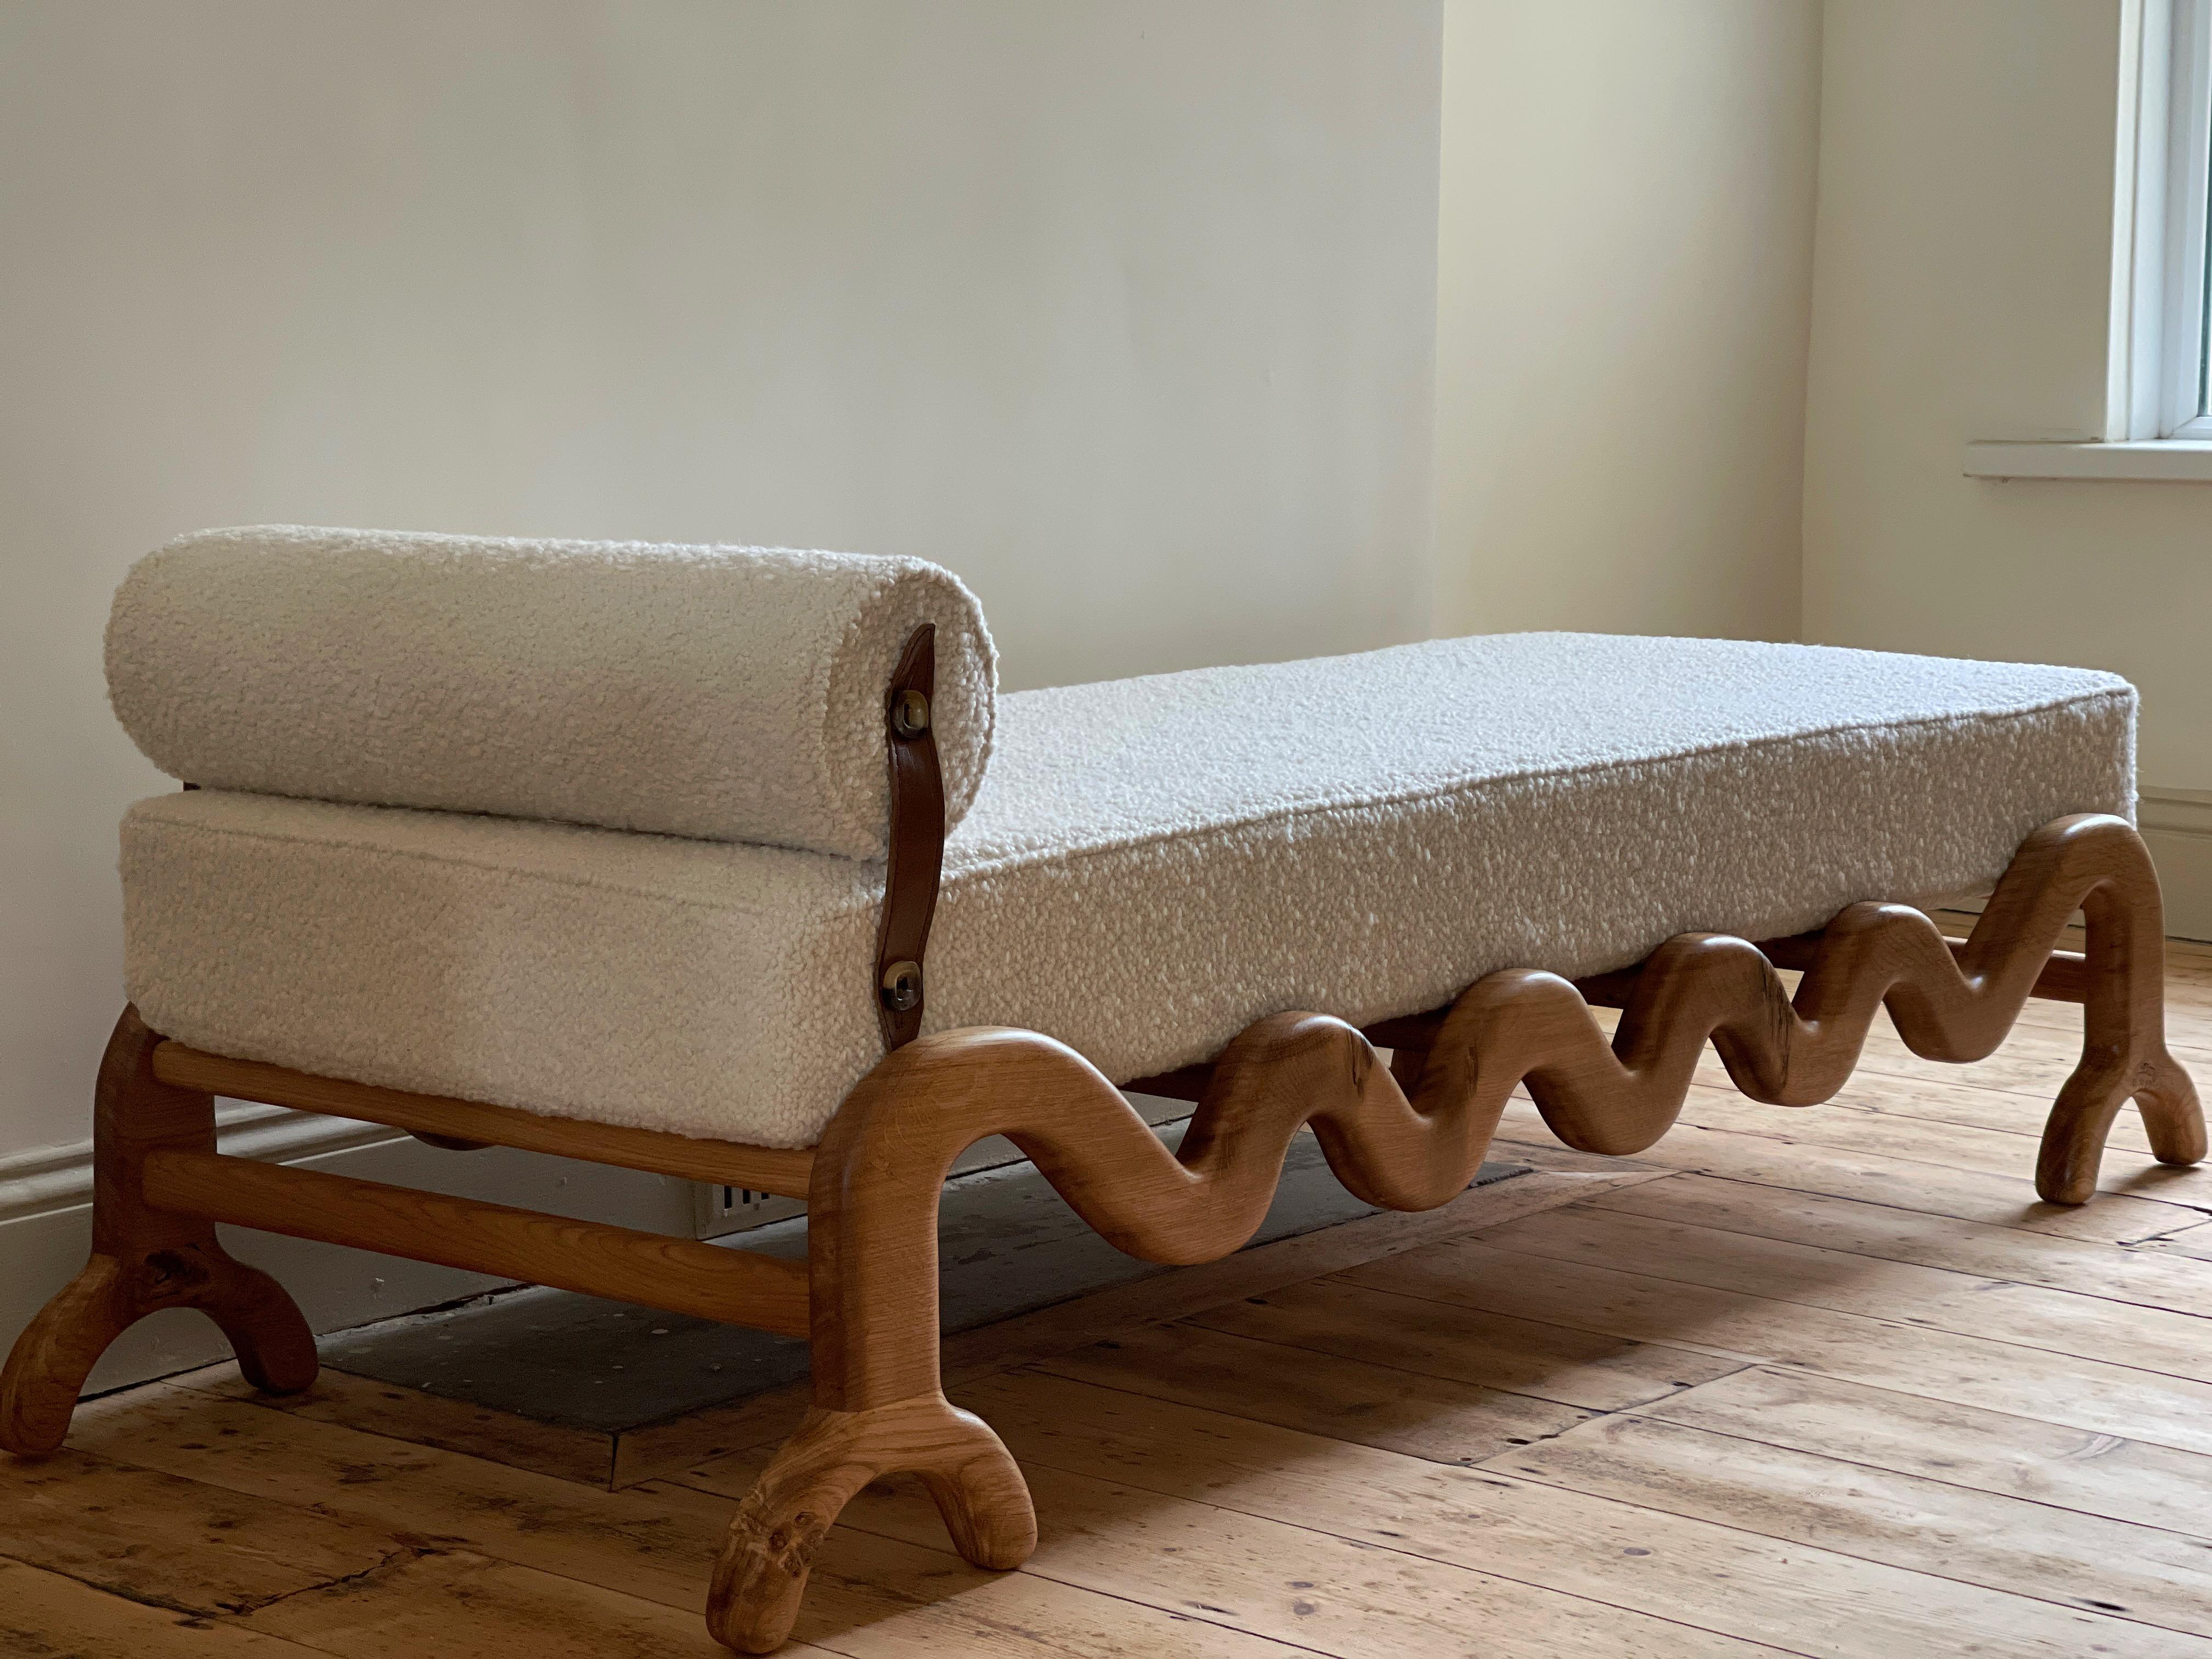 Part of the Sunday collection exclusive to Alexander & Ellis, and designed by Founder Oliver A-J, the Sunday Day Bed was designed and handcrafted in house with the finest Oak and Bouclé upholstery. 

Available in other wood species’ and fabrics, the